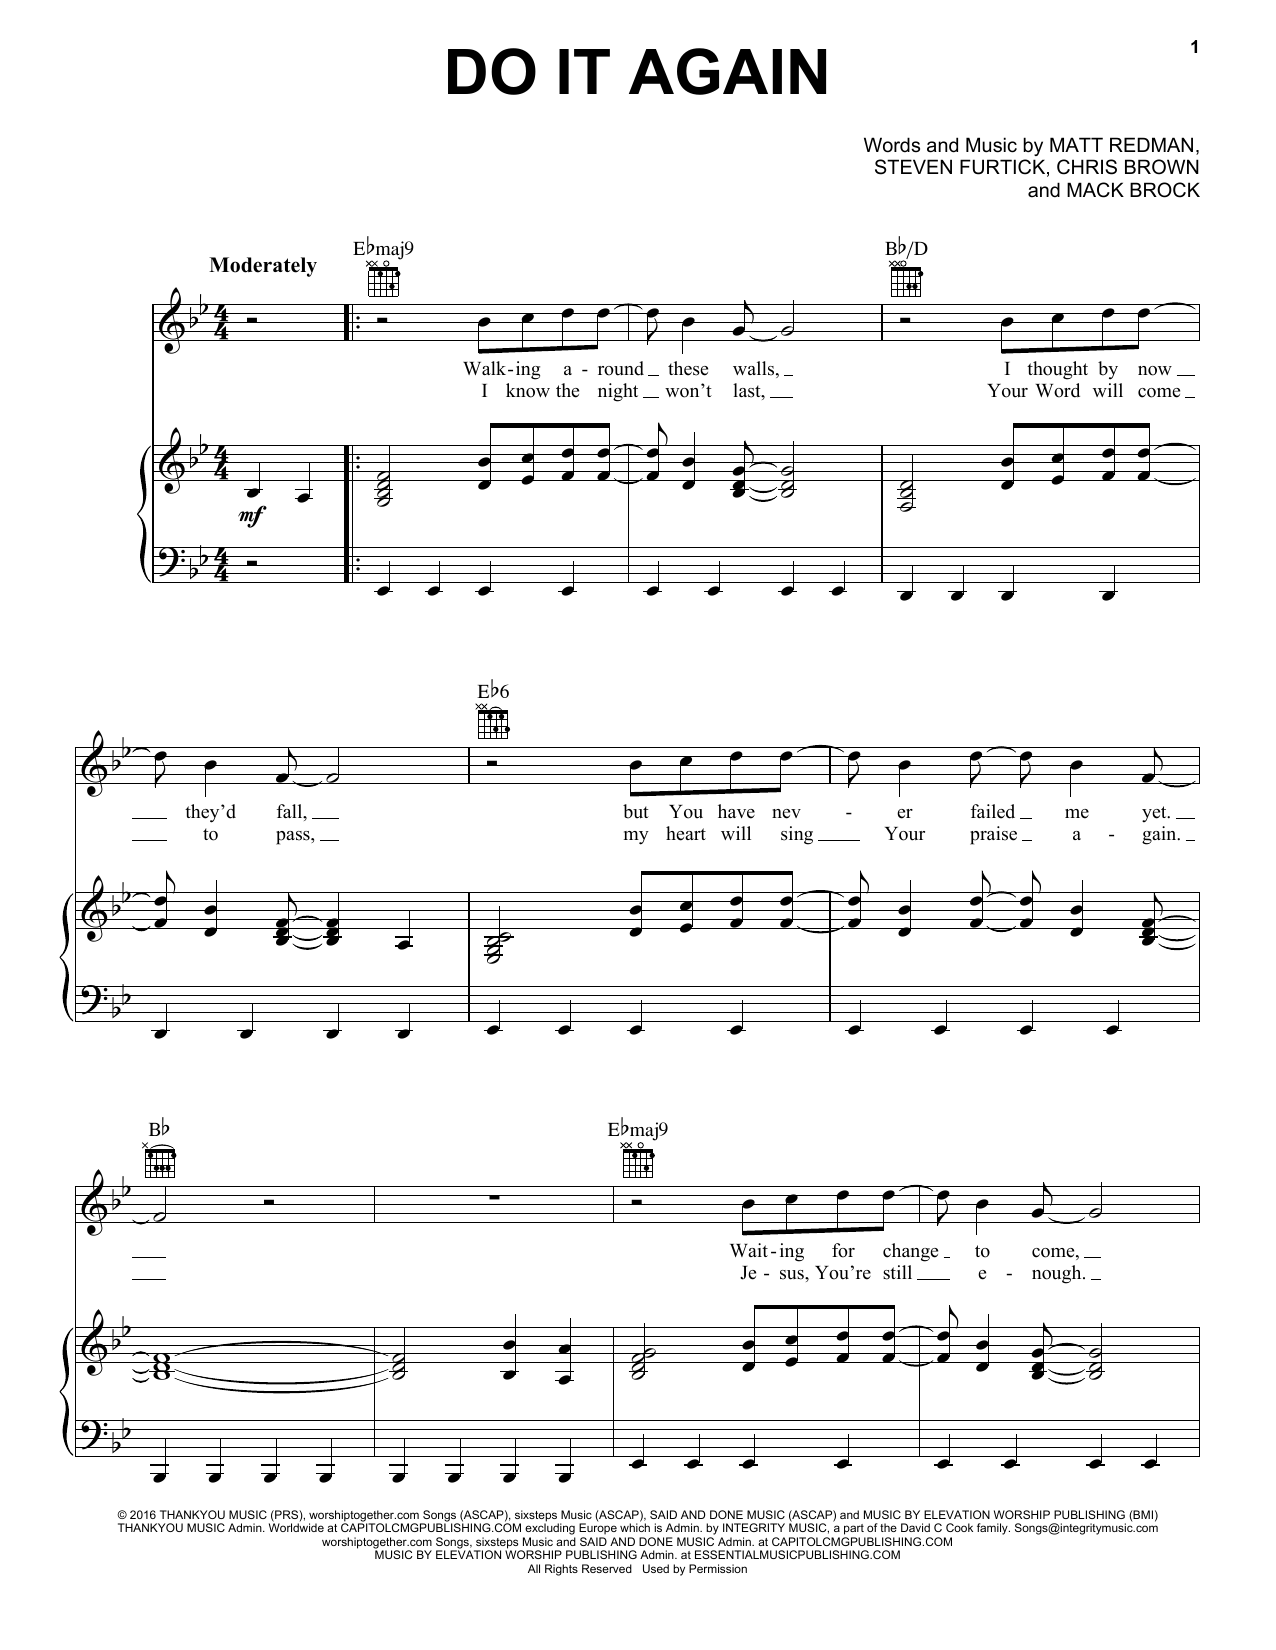 Elevation Worship Do It Again sheet music notes and chords. Download Printable PDF.